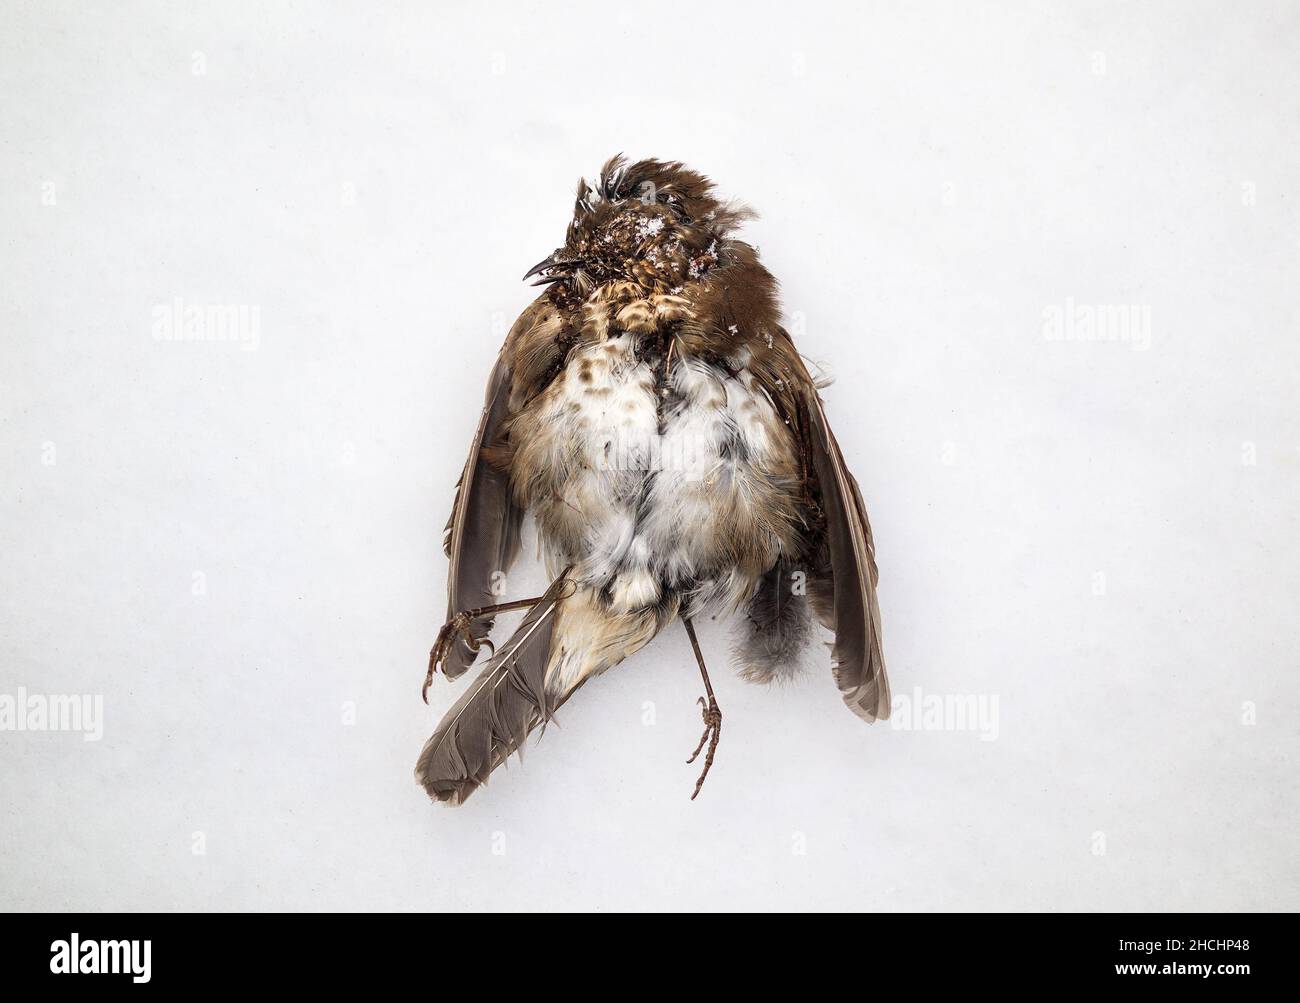 Small dead bird frozen on the ground in the snow, top view. Sparrow or songbird deceased due to bellow zero temperature in winter storm blizzard or fl Stock Photo